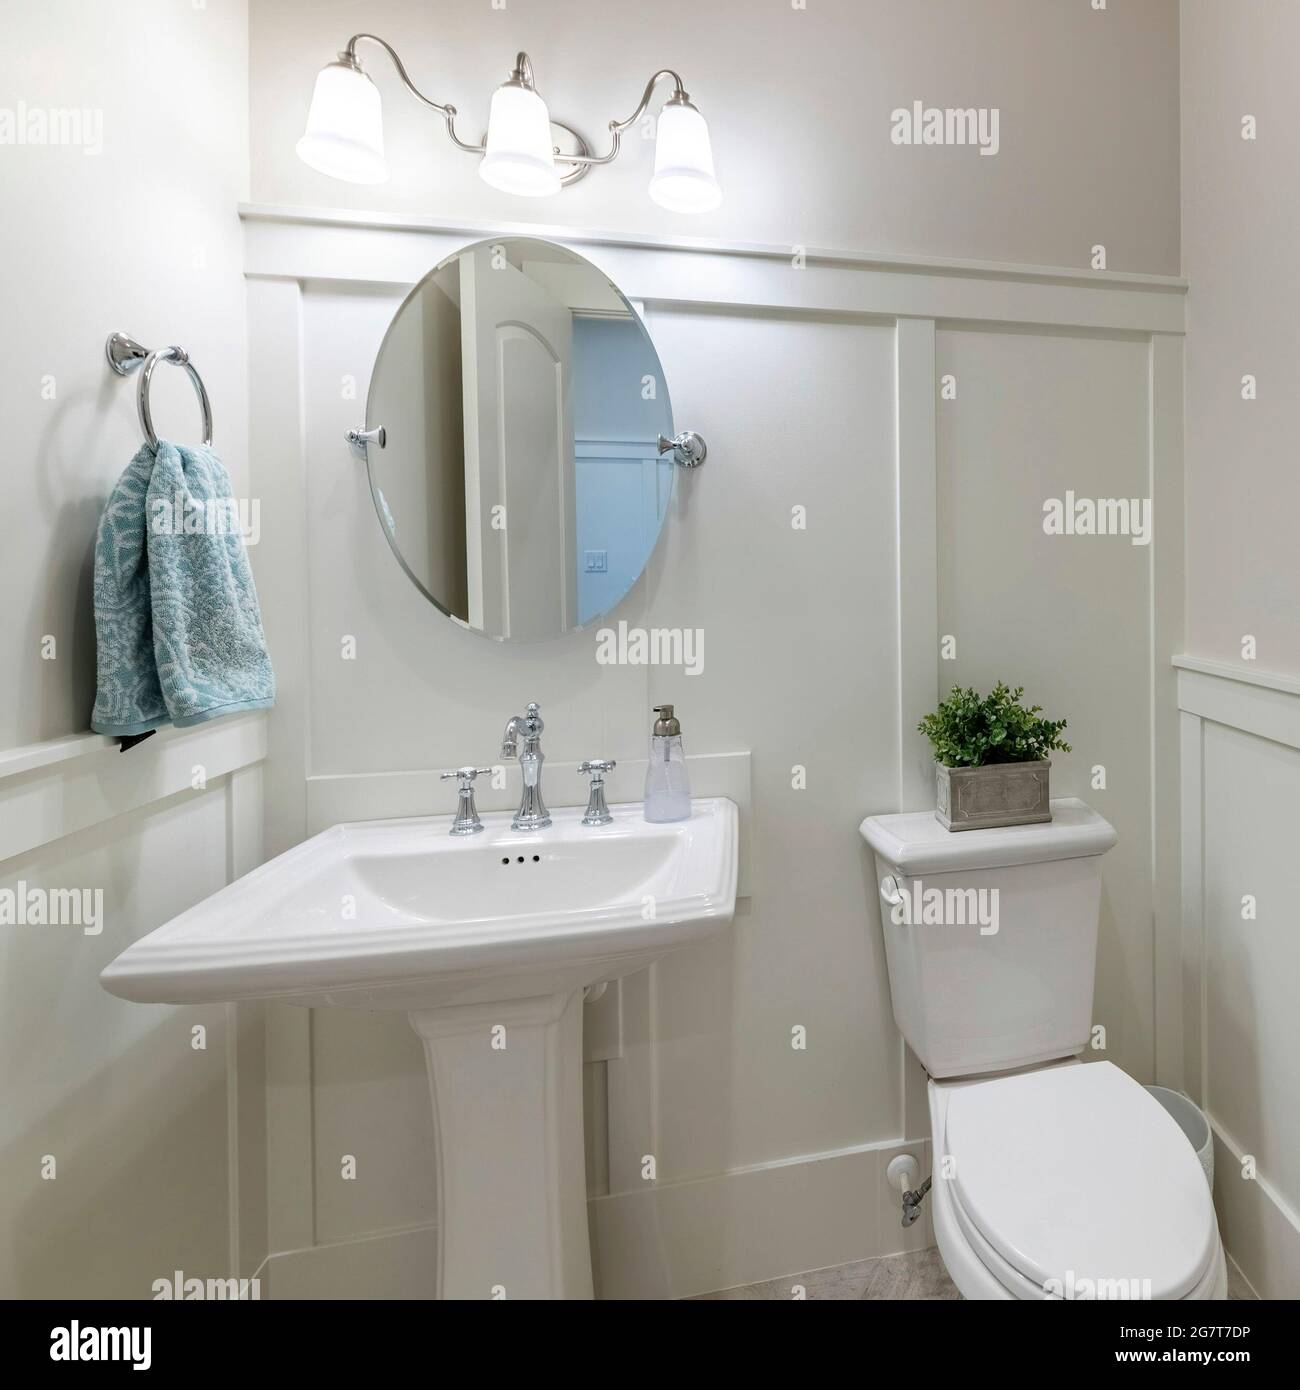 Square frame Interior of a powder room with half wooden panel and lights Stock Photo